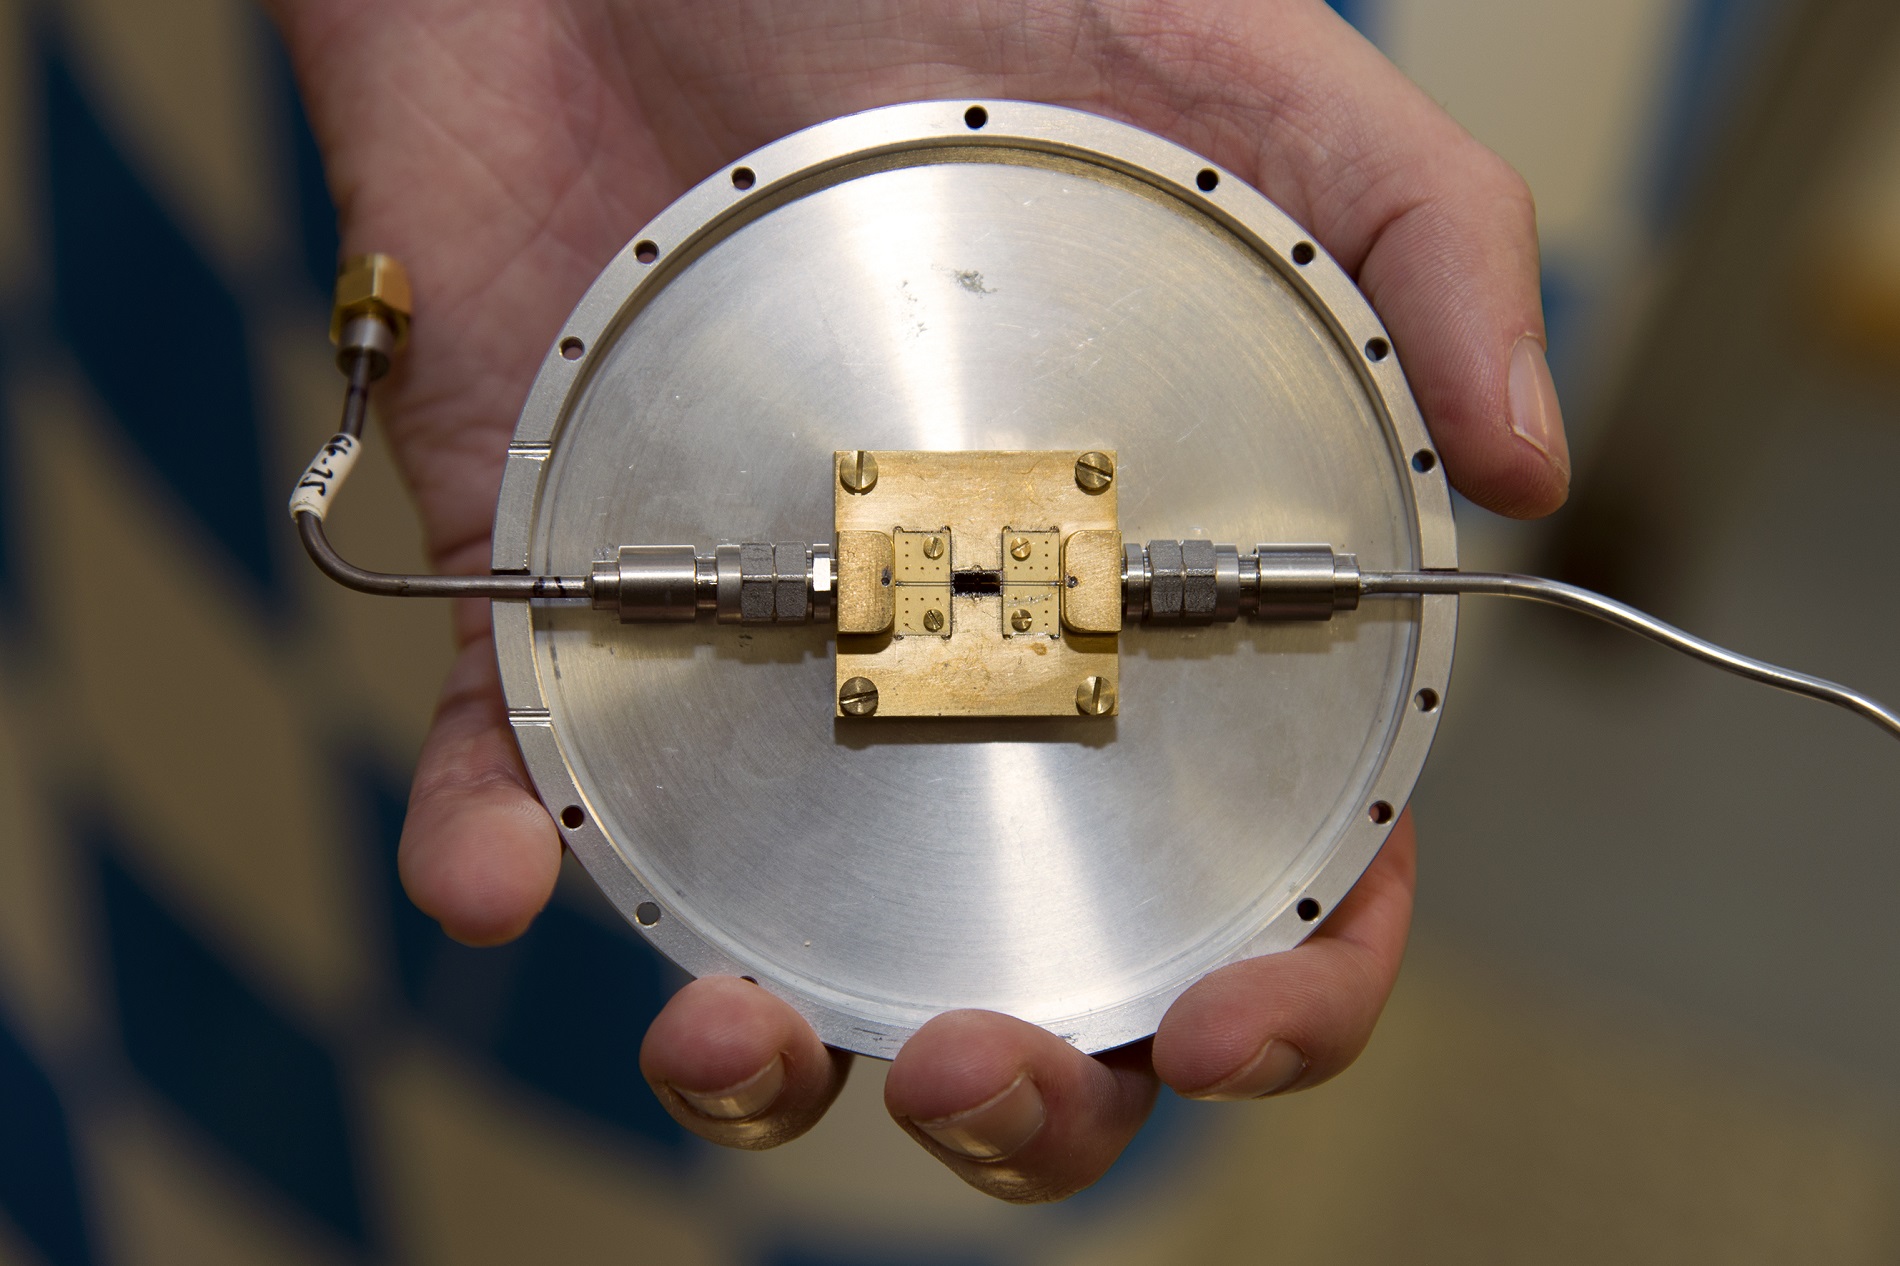 Quantum circuit, developed at the Walther-Meissner-Institut, which can be used to produce restricted microwave states